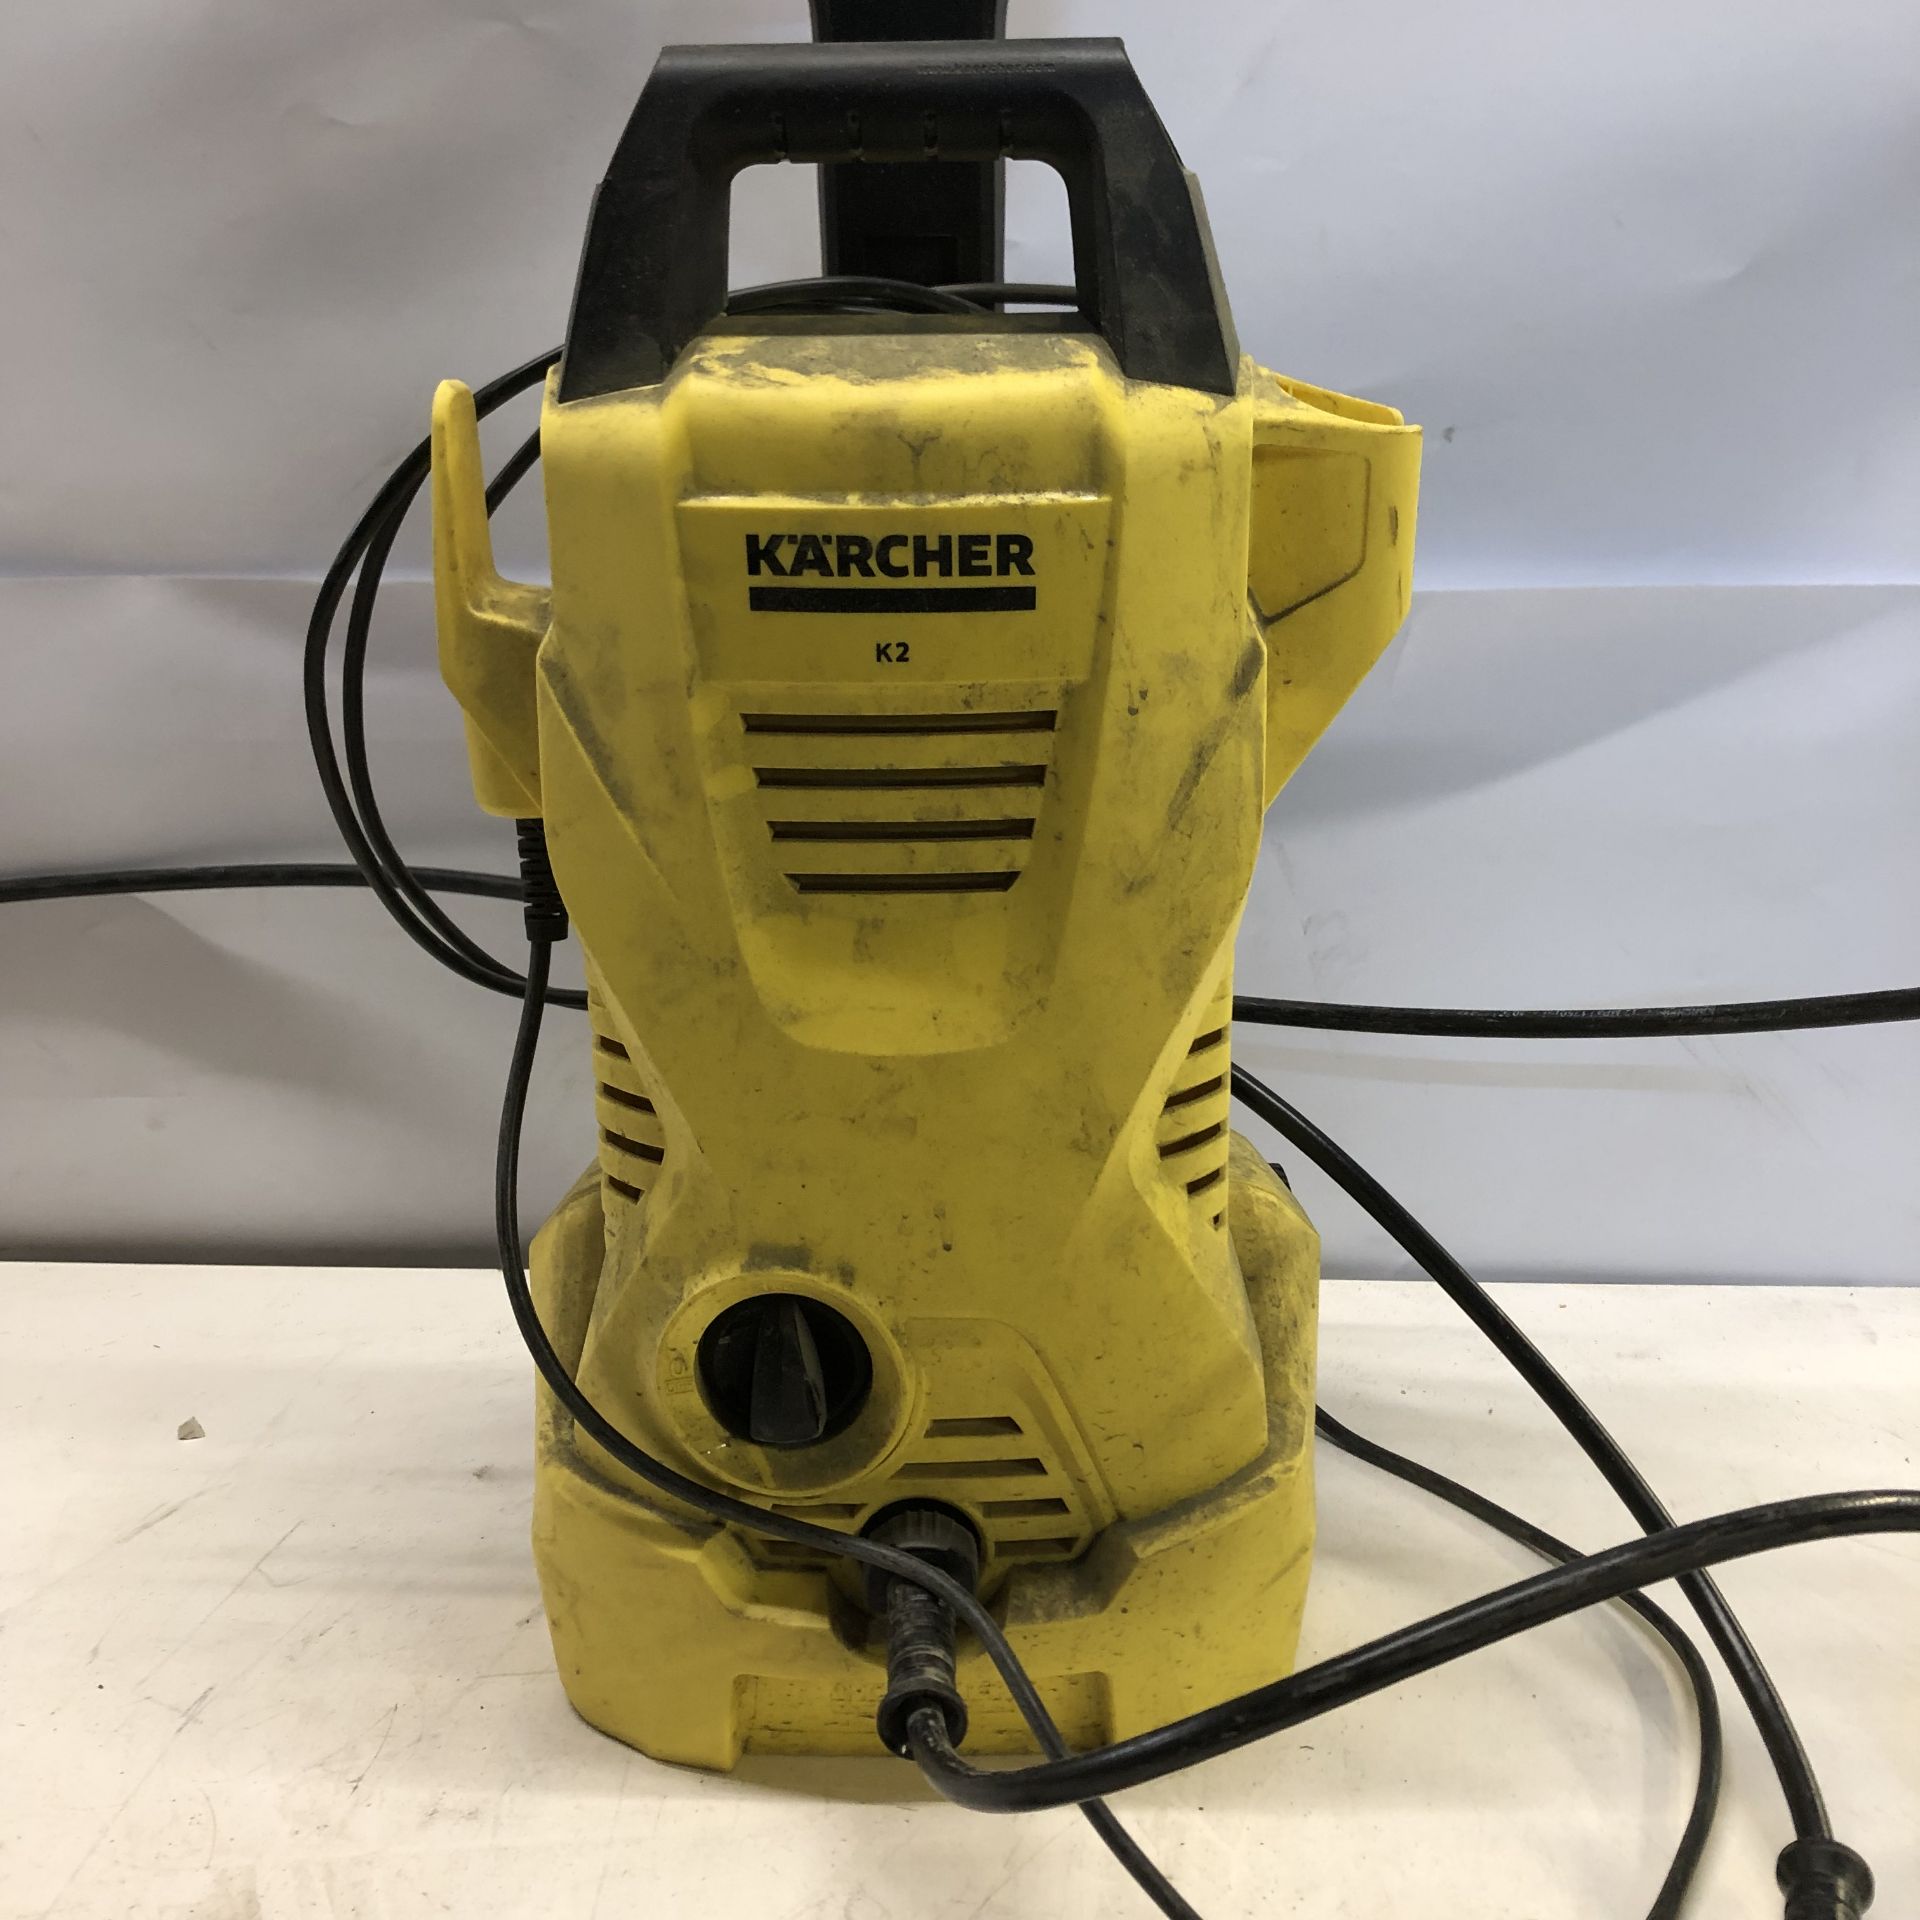 Karcher power washer - Image 2 of 2